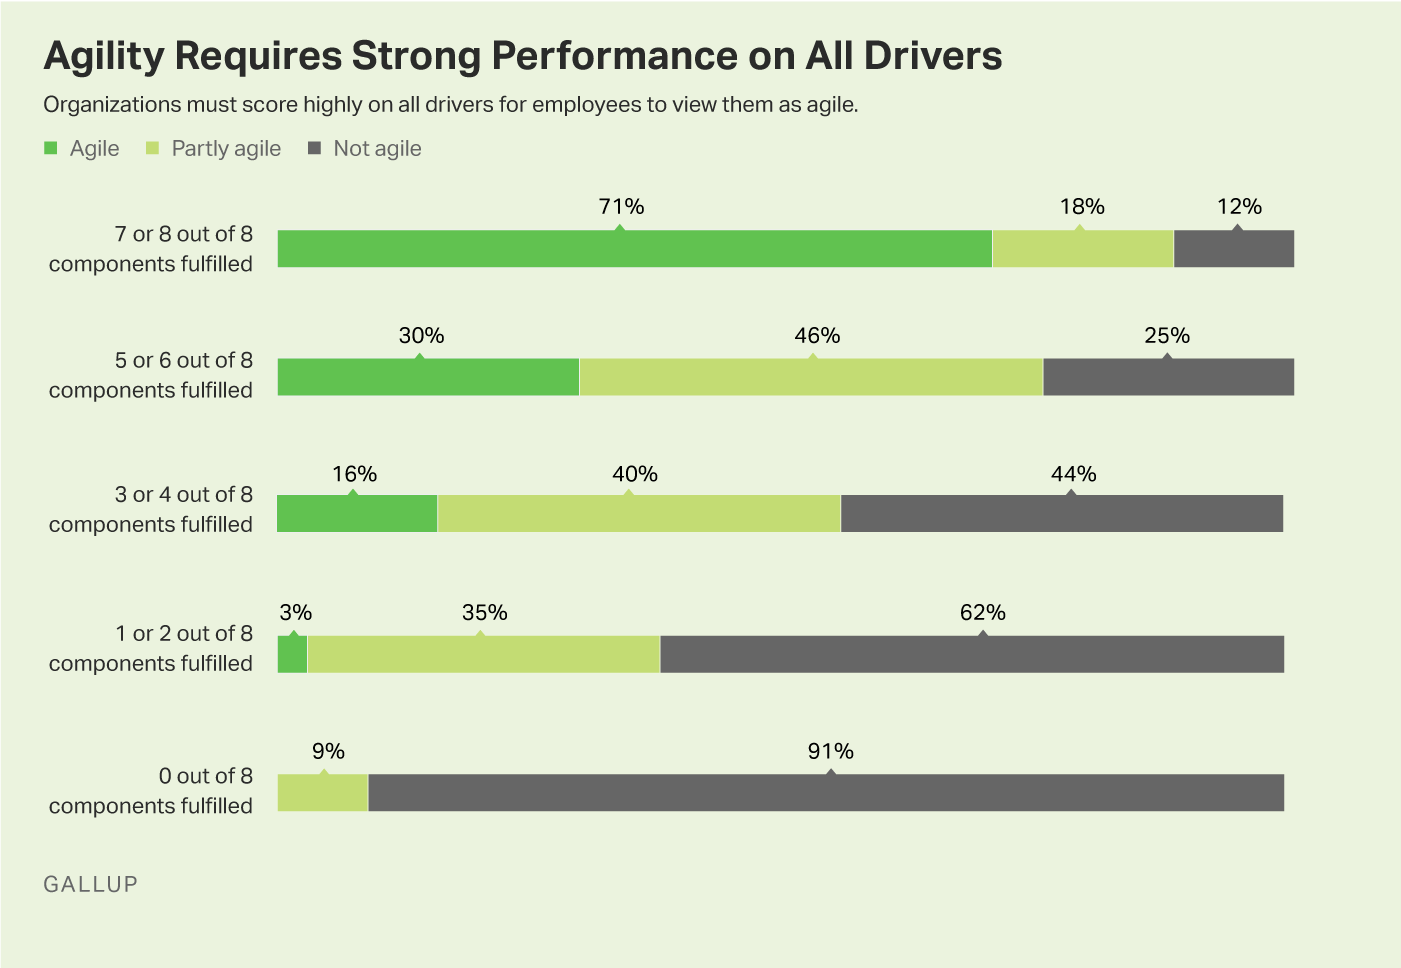 Graphic: Organizations Must Score High on All Drivers for Employees to View Them as Agile.